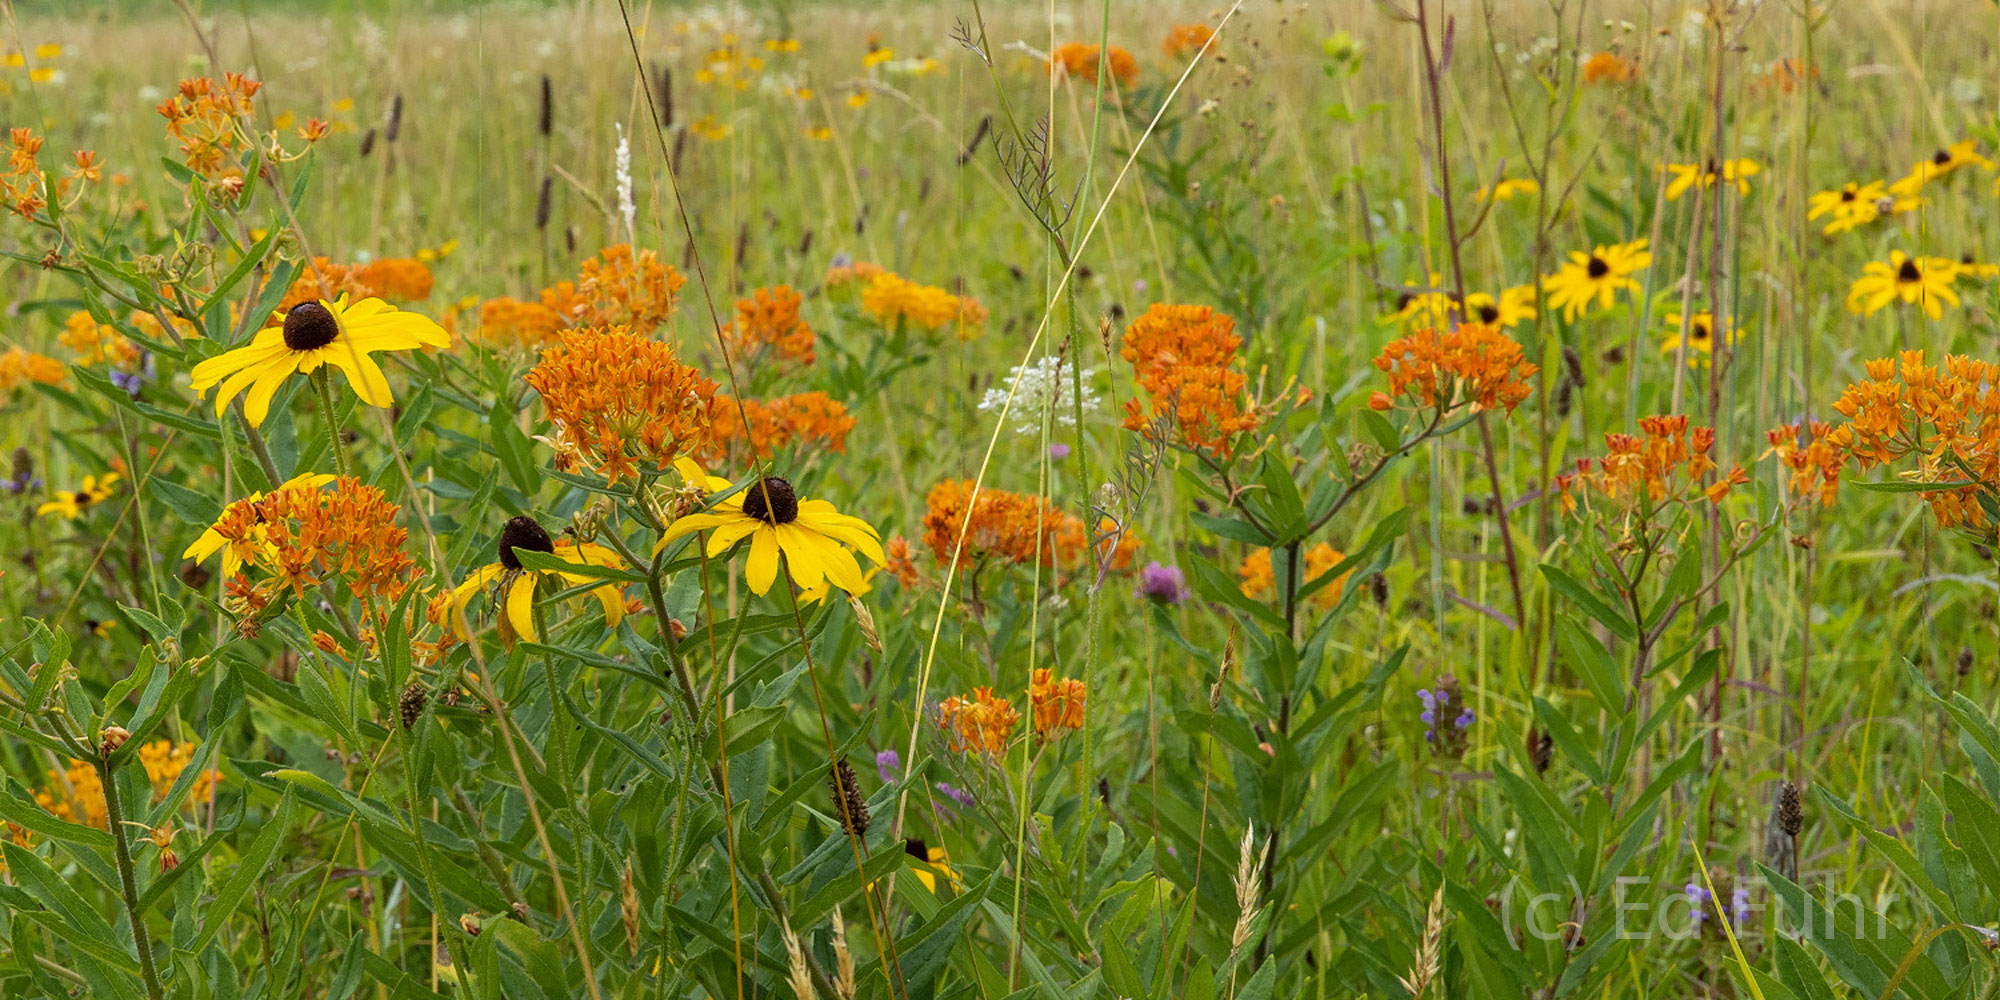 Rudbeckia, Butterfly Weed, Clover and other wildflowers burst forth in the heat of midsummer. .